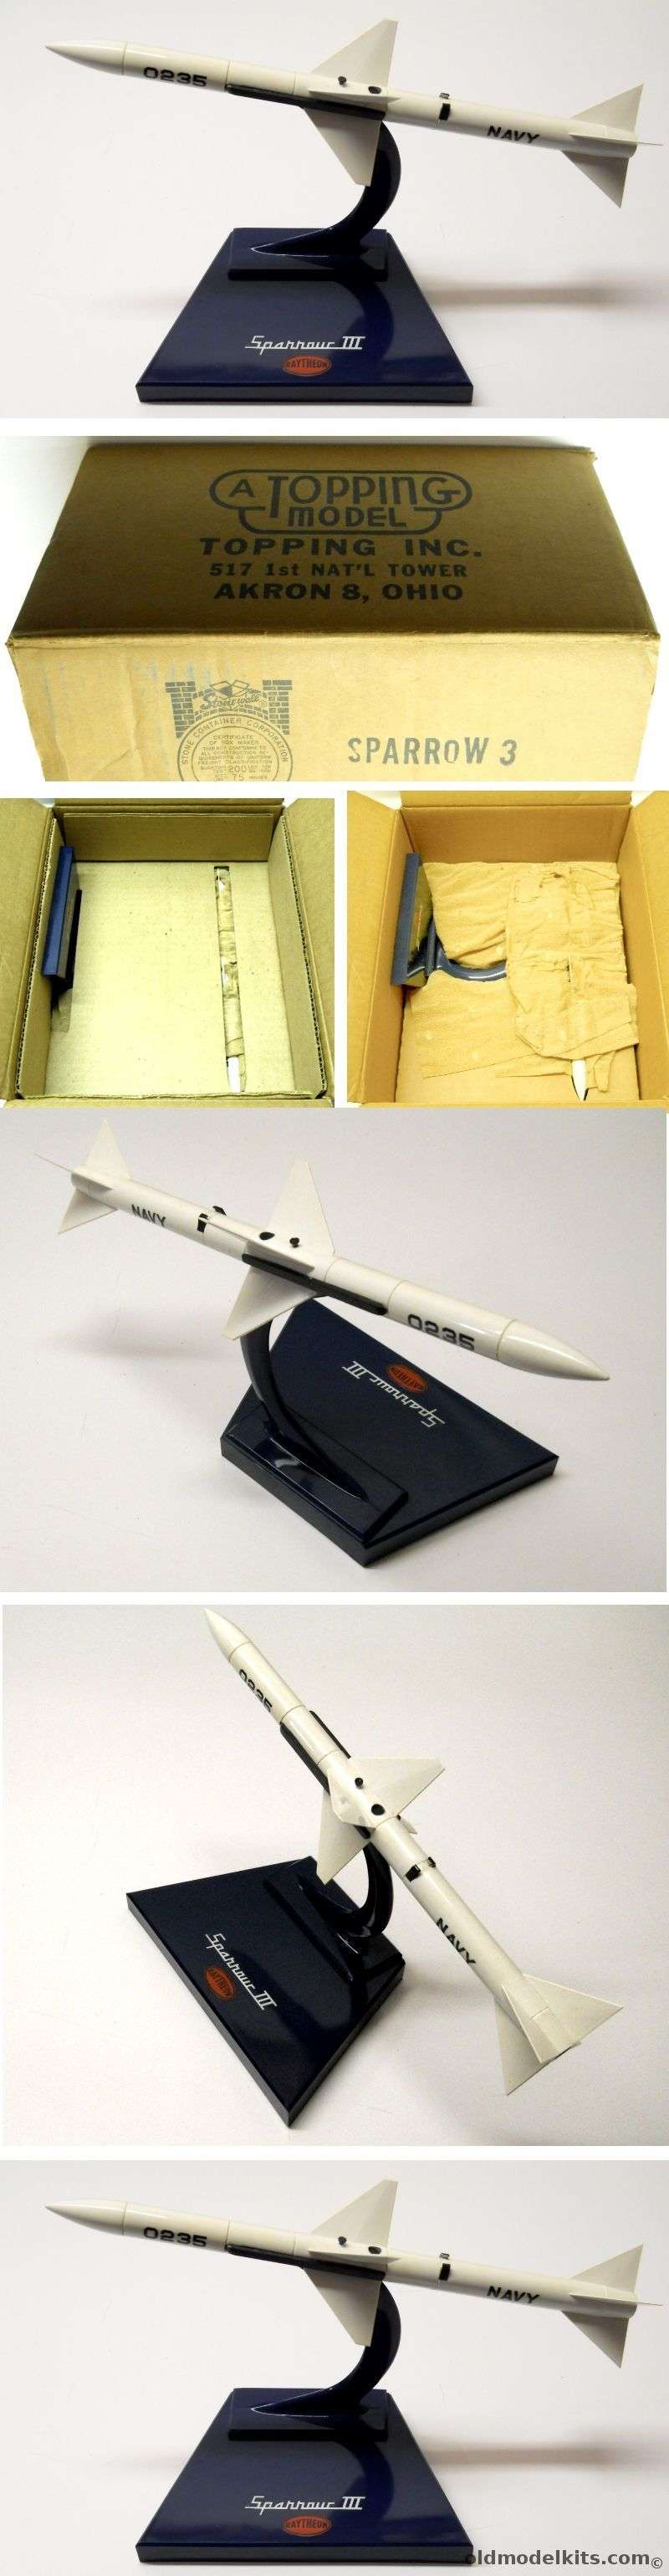 Topping Sparrow 3 Missile - Factory Desktop Model In The Original Topping Box plastic model kit